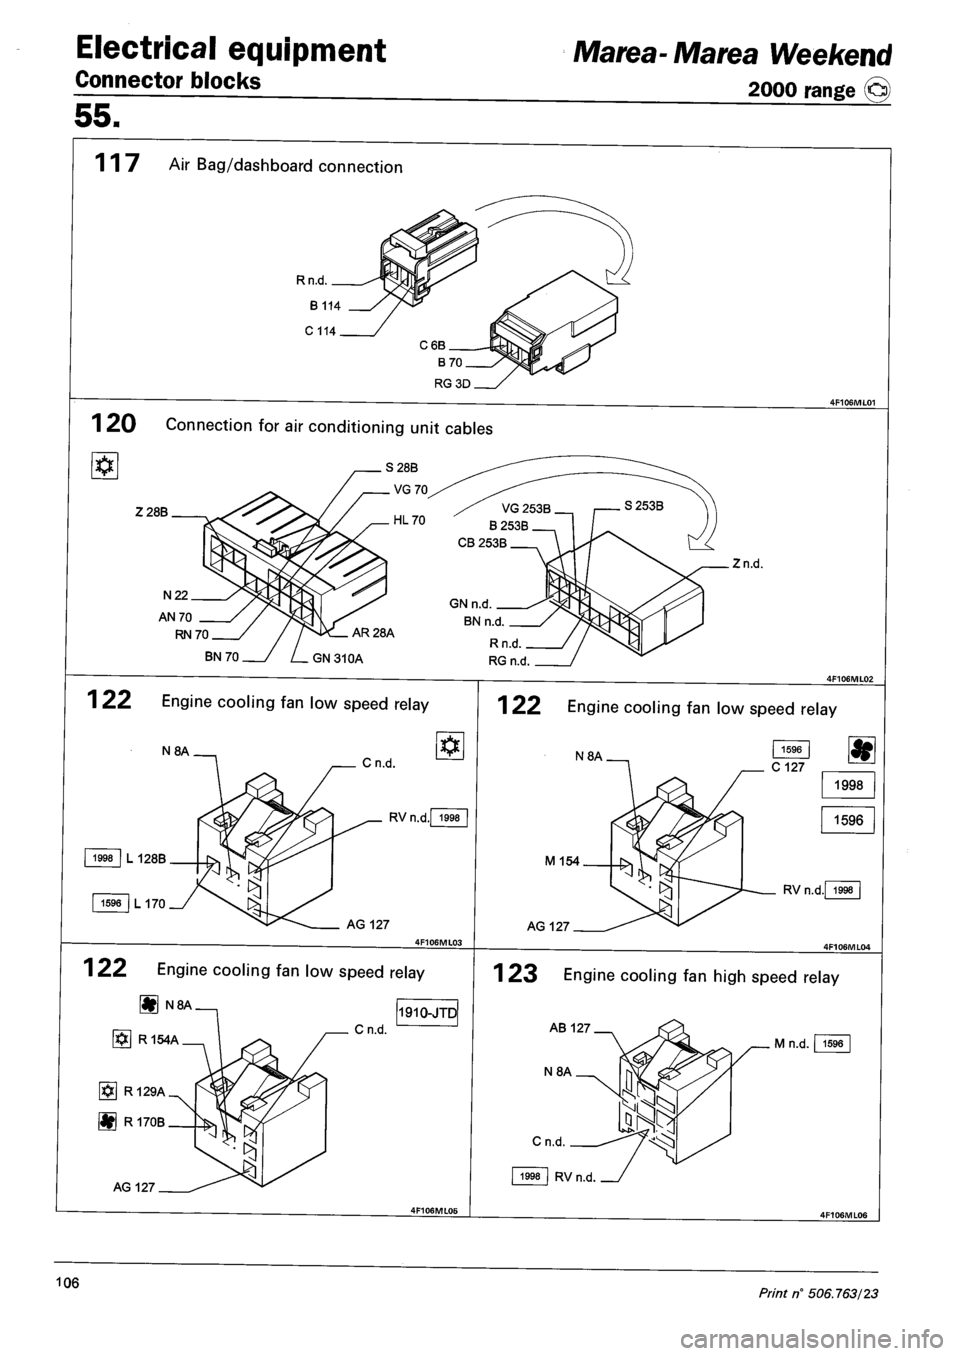 FIAT MAREA 2001 1.G Workshop Manual Electrical equipment 
Connector blocks 
Marea- Marea Weekend 
2000 range © 
55. 
117 Air Bag/dashboard connection 
Rn.d 
1 20 Connection for air conditioning unit cables 
Z28B 
Zn.d. 
N22 
AN 70 
RN 